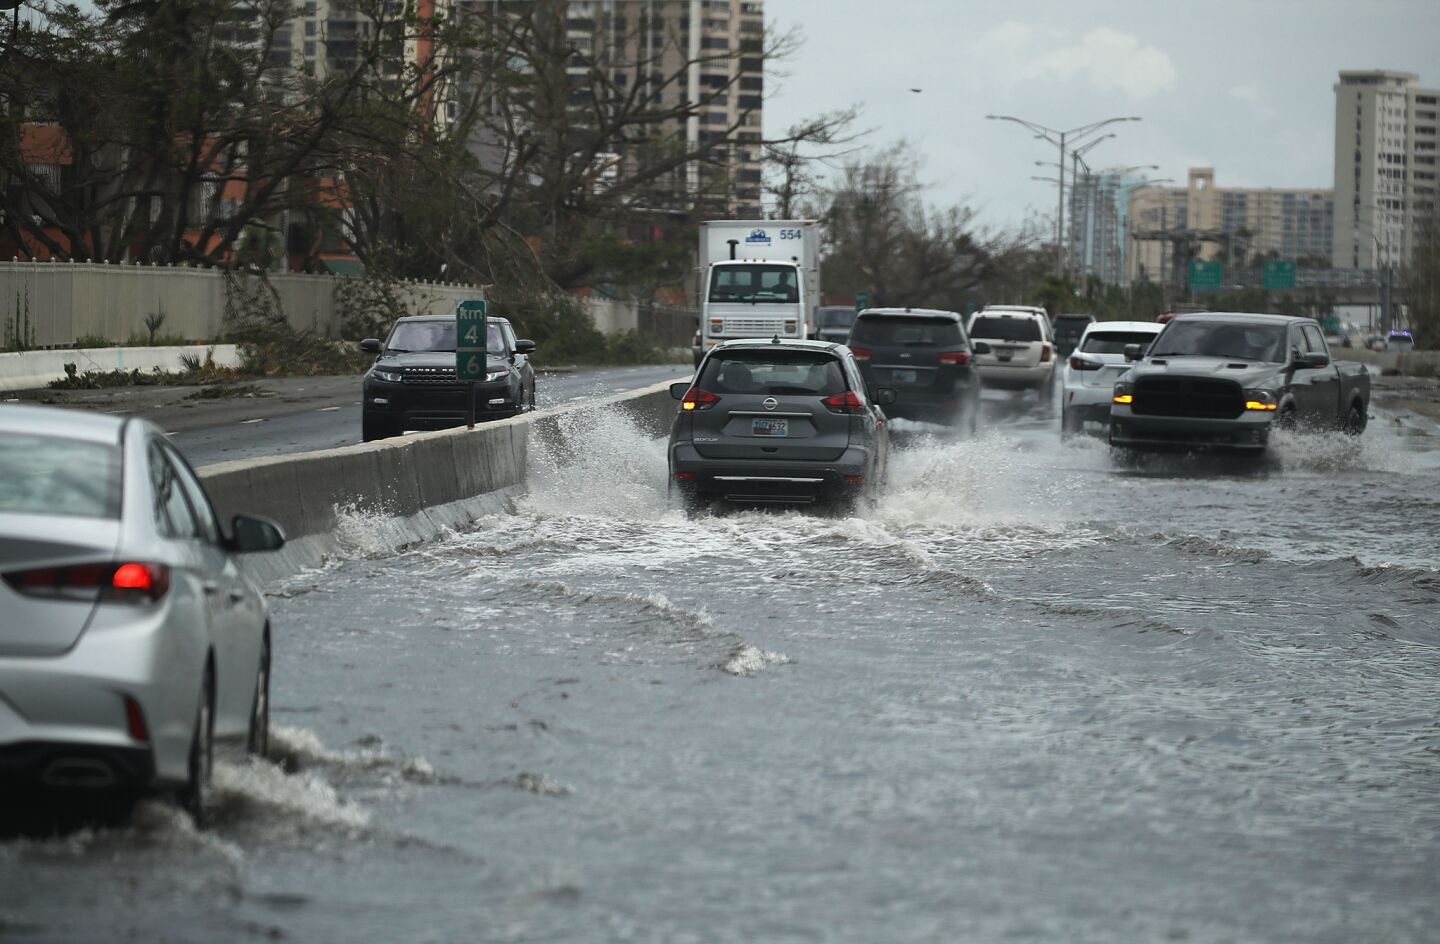 Vehicles drive along a flooded road after Hurricane Maria passed through the area in San Juan, Puerto Rico.